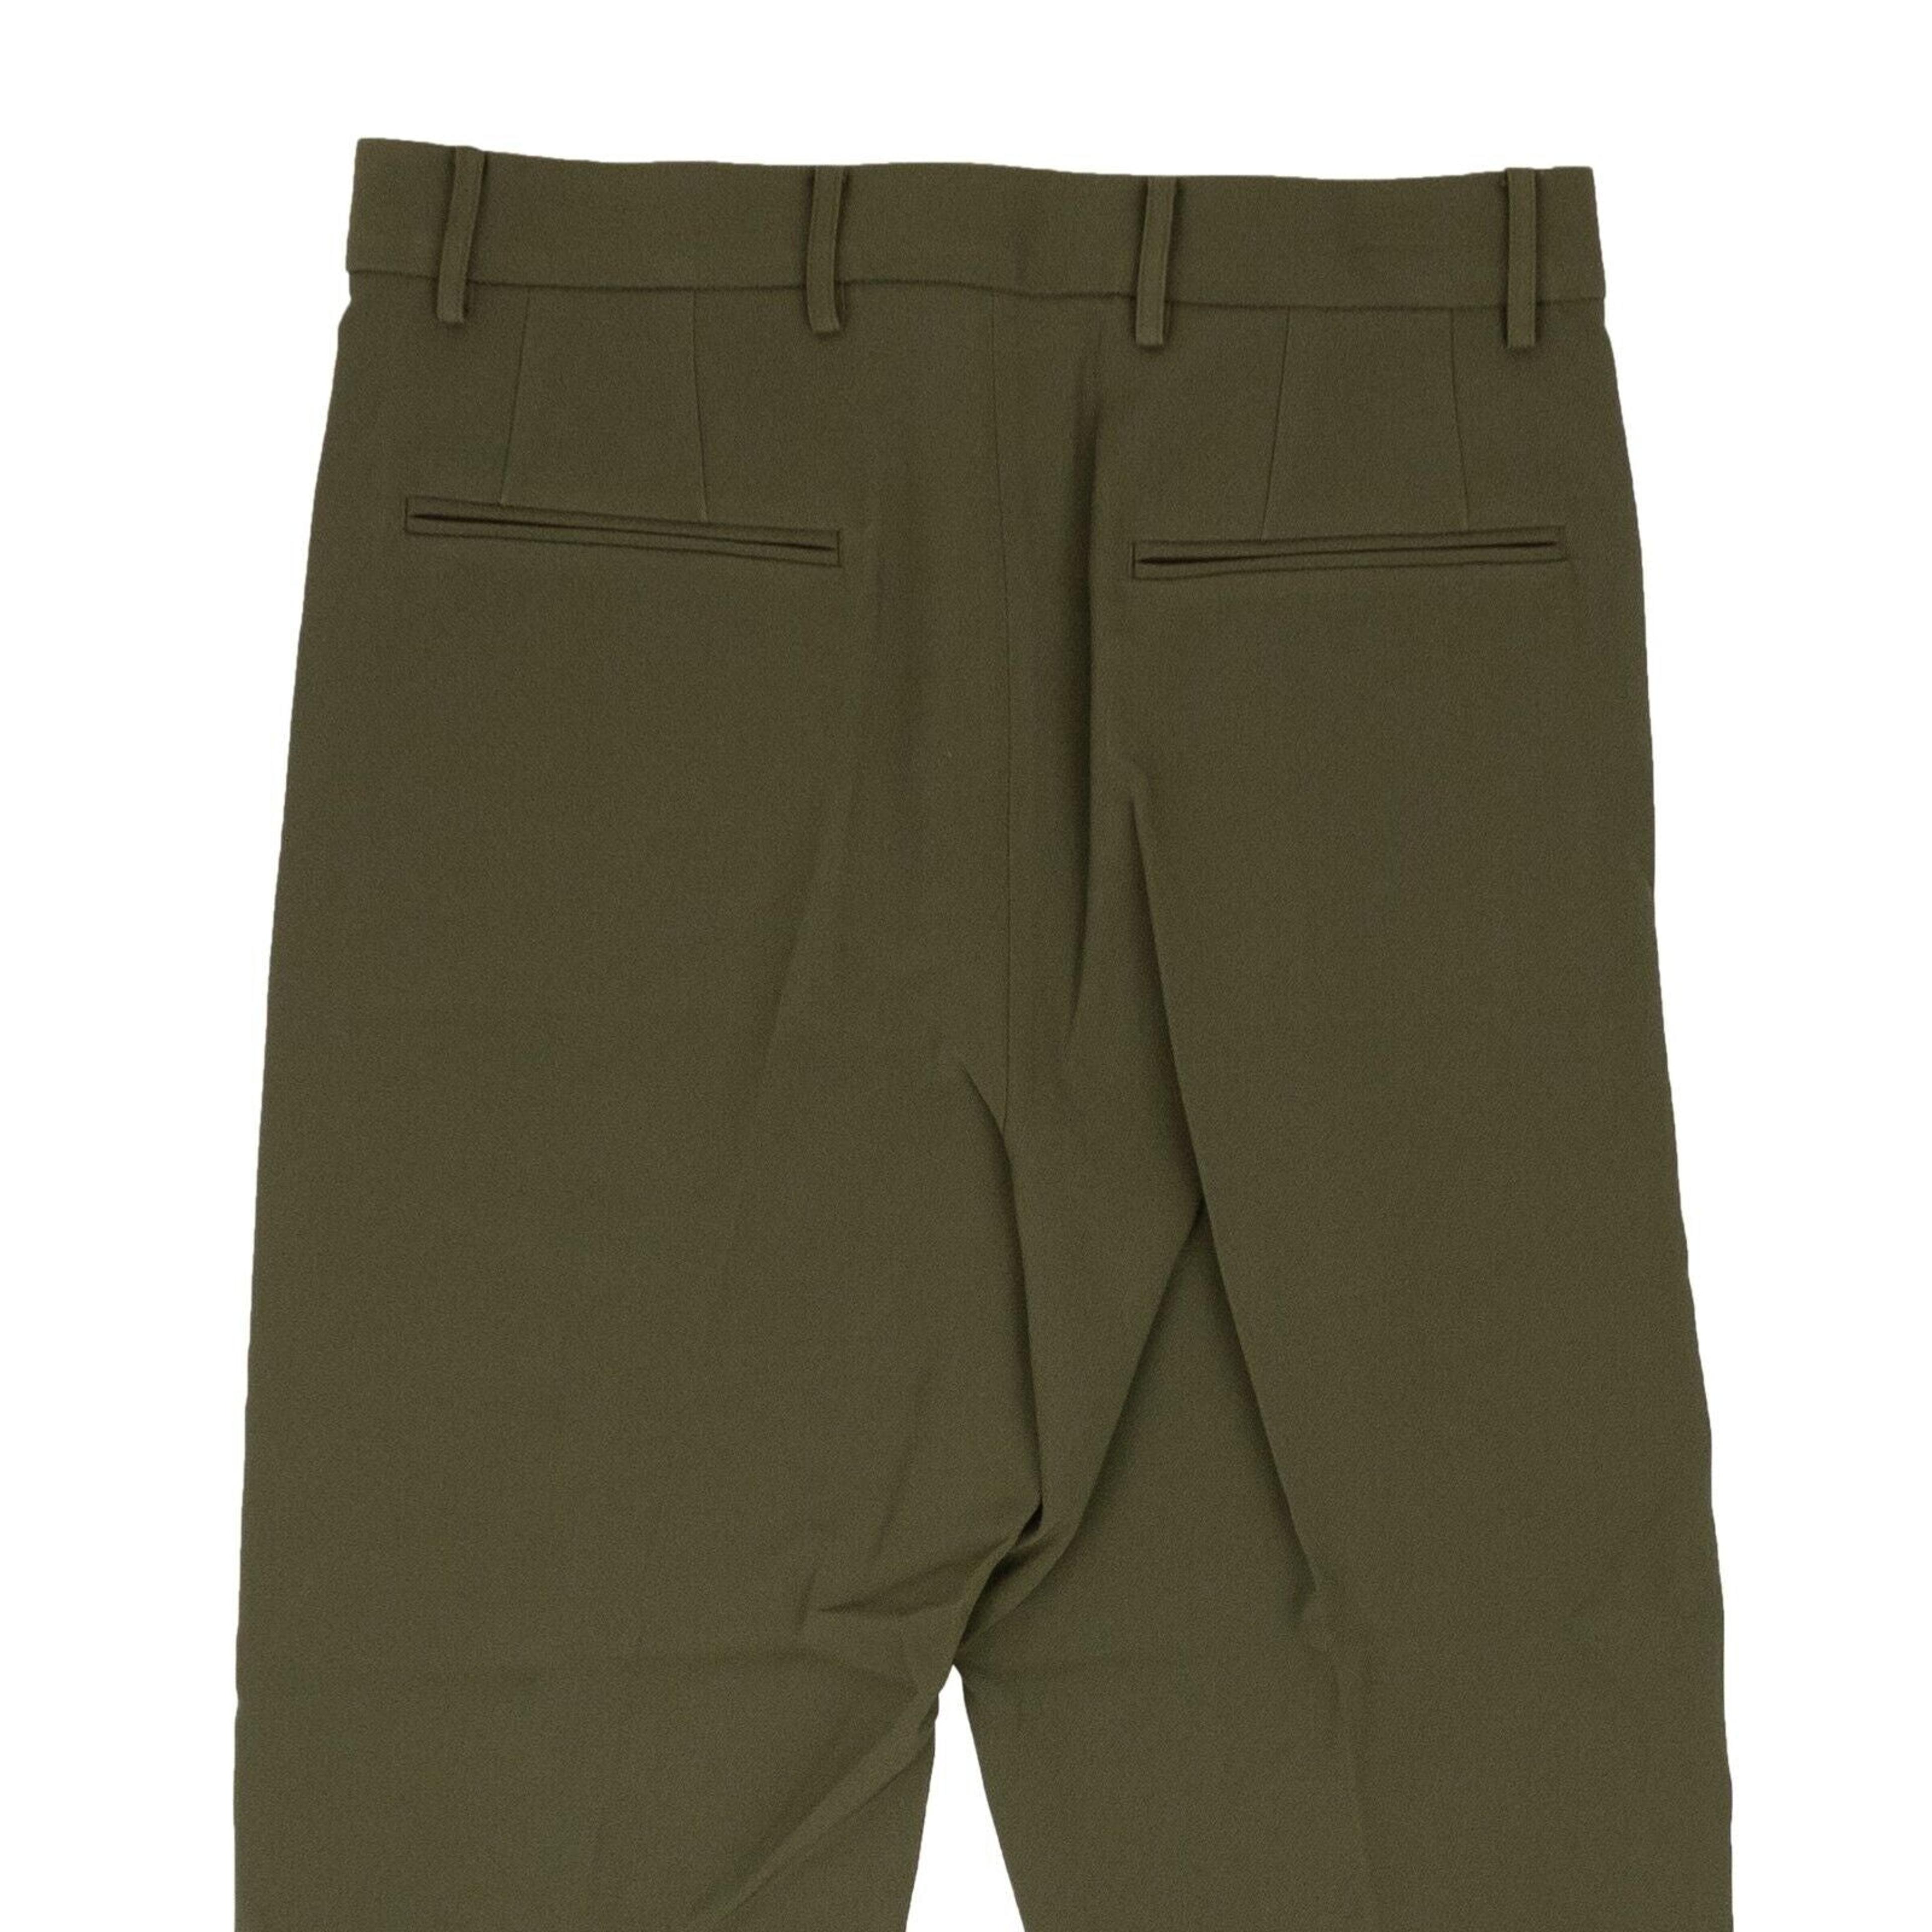 Alternate View 3 of Olive Green Polyester Twill Trousers